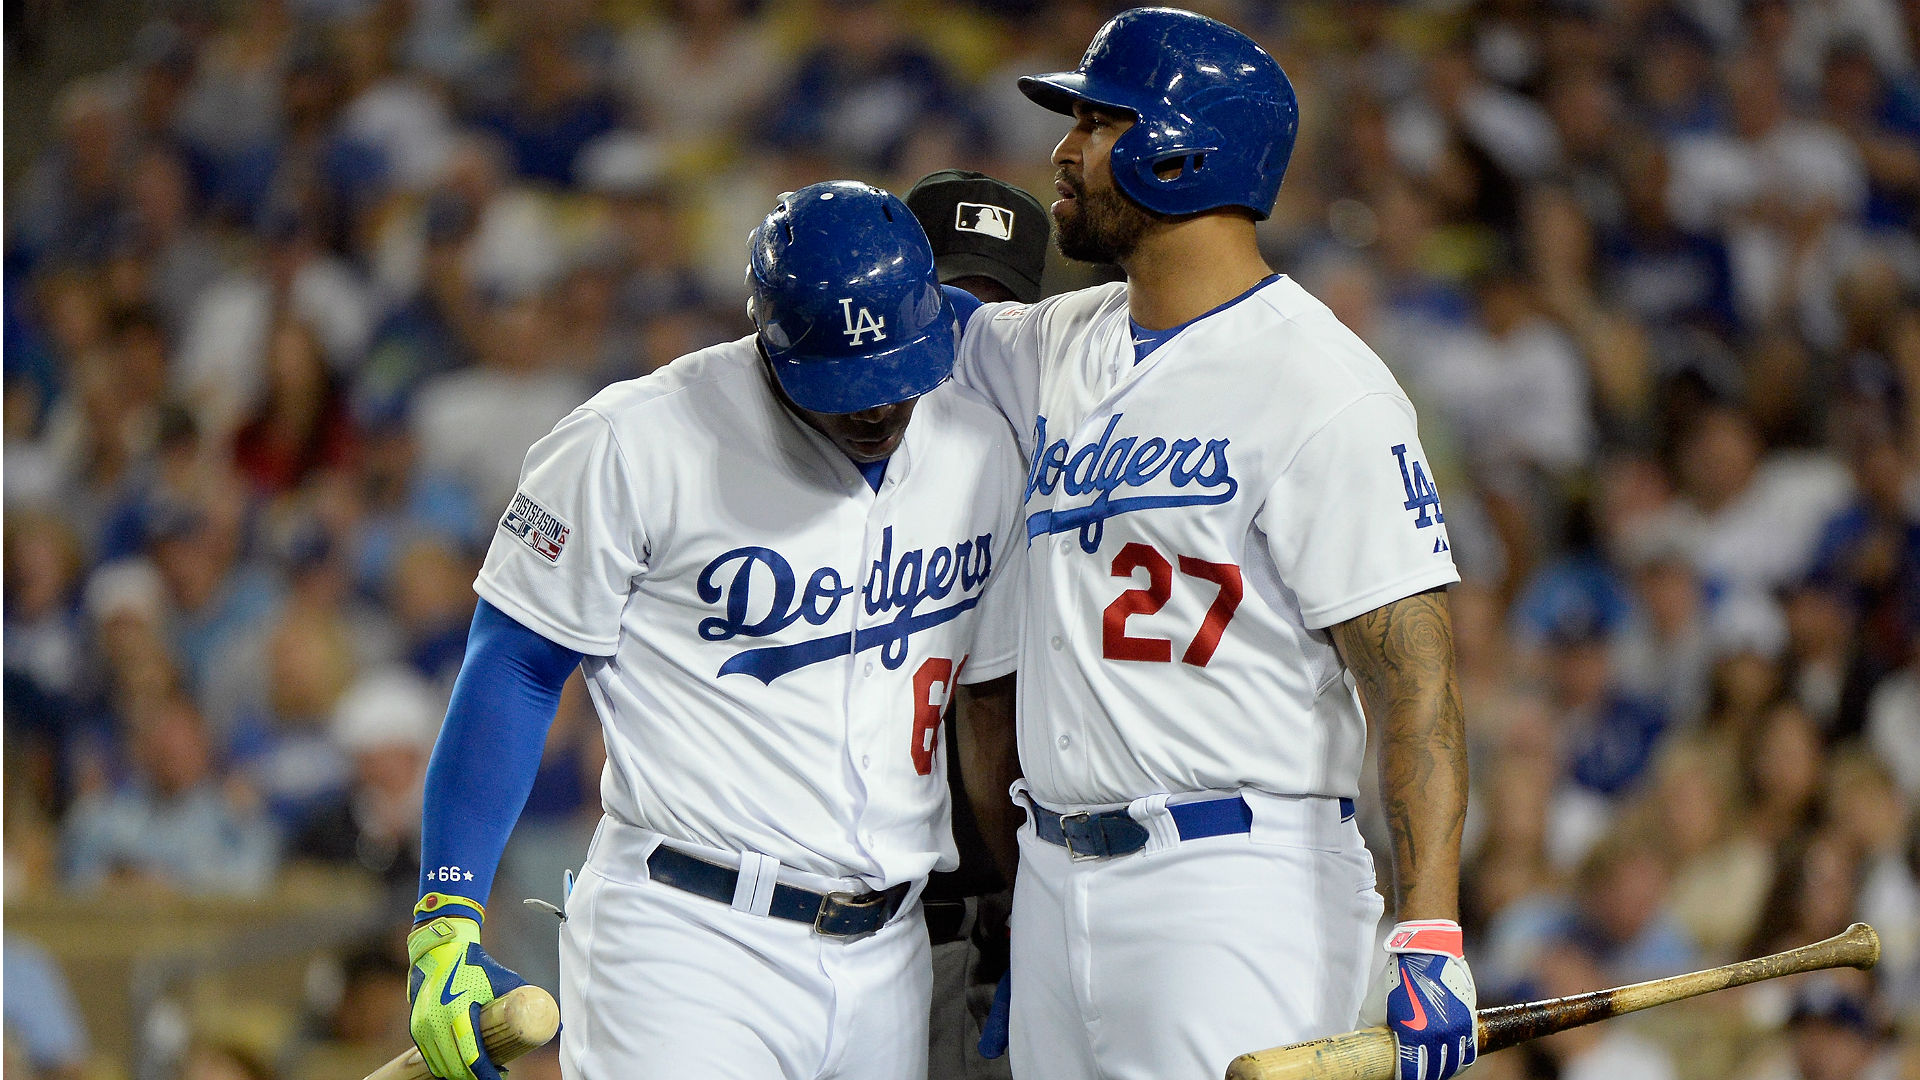 Puig slashed .267/.327/.494 with 23 home runs and 63 RBIs in 2018 while Kemp had a bounce-back year last season.